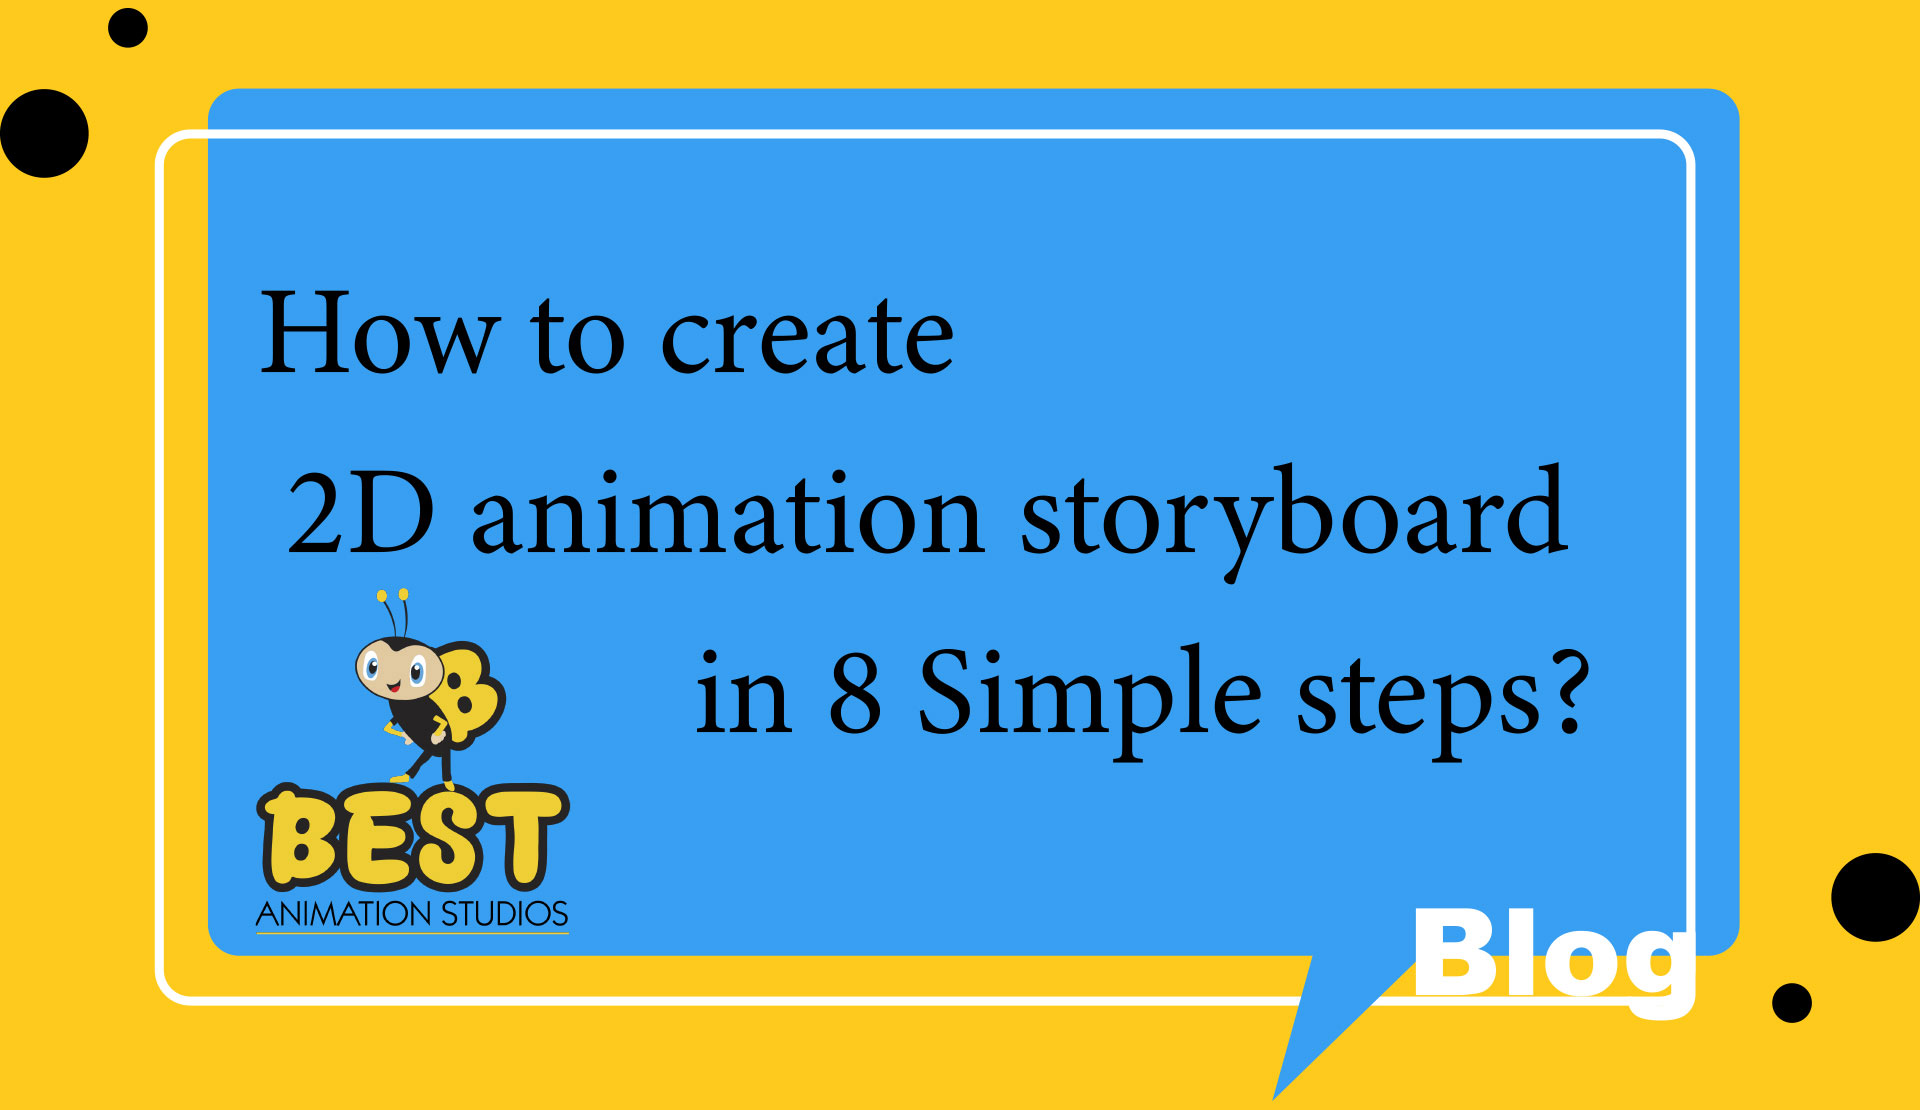 How to create 2D animation storyboard in 8 Simple steps?